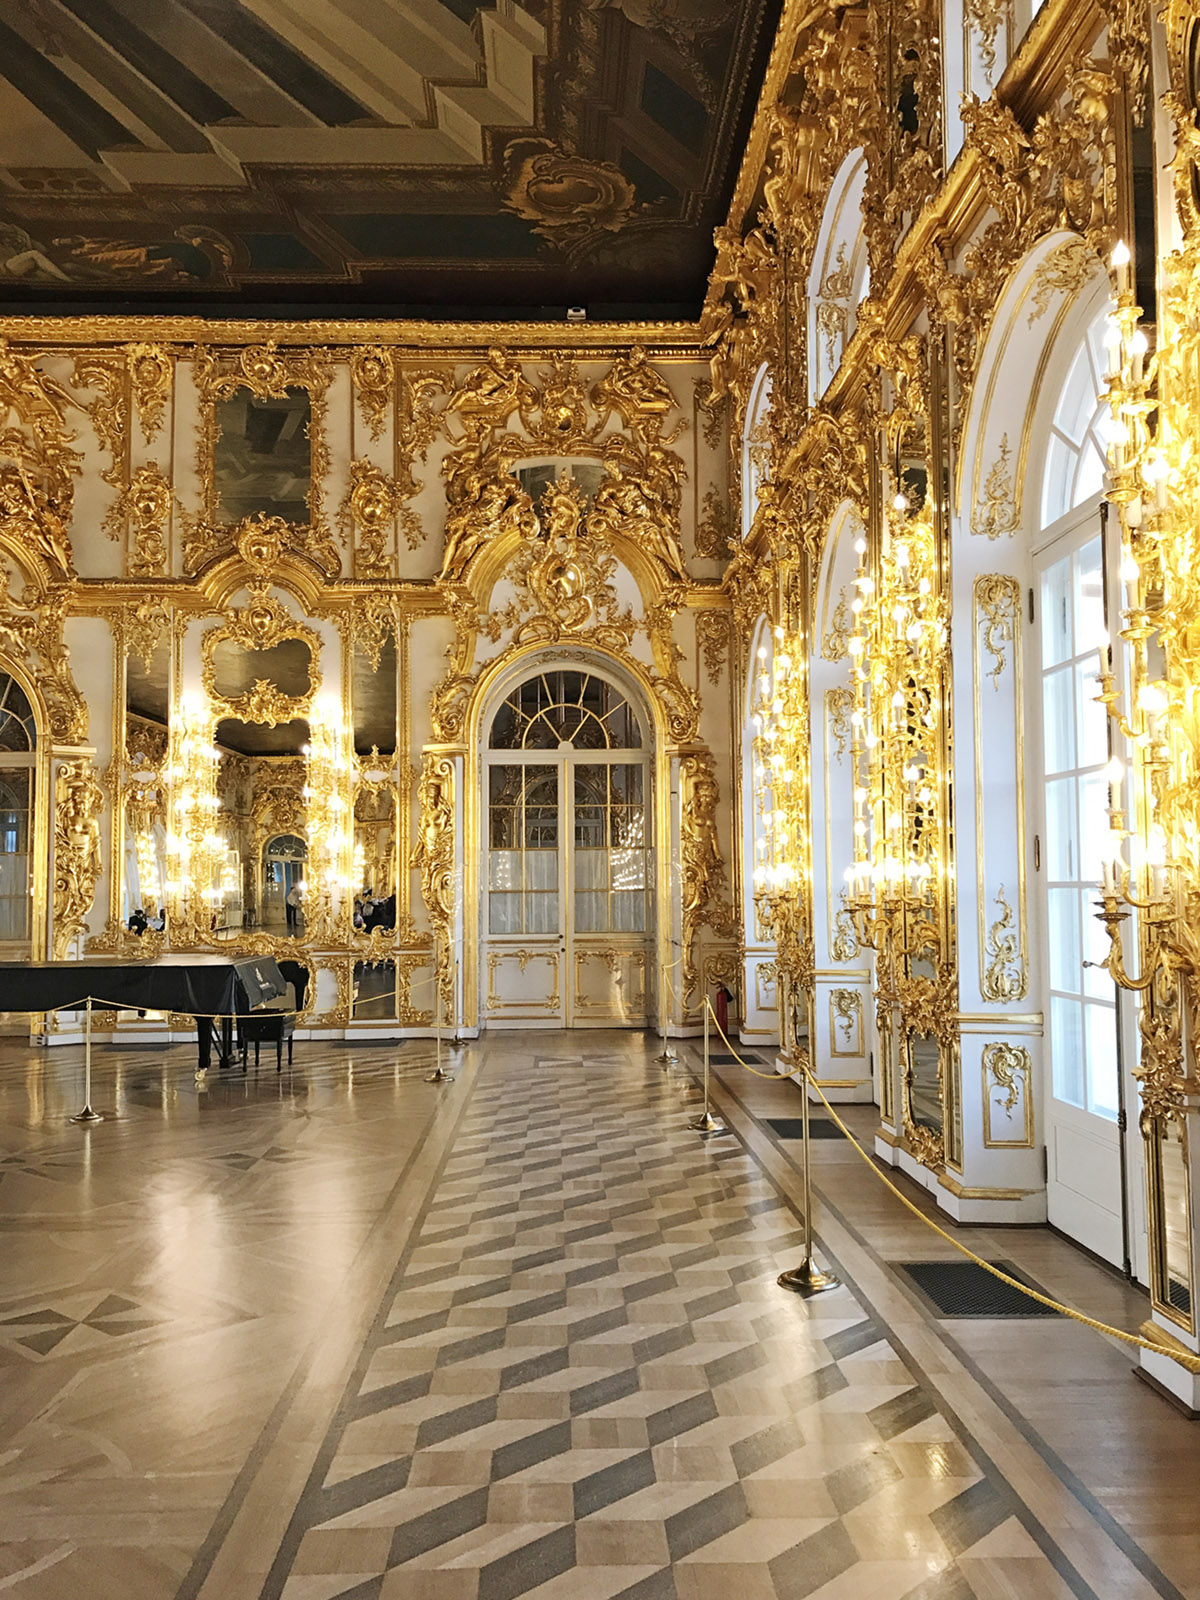 the gilded ballroom of Catherine's Palace | St. Petersburg travel guide on coco kelley